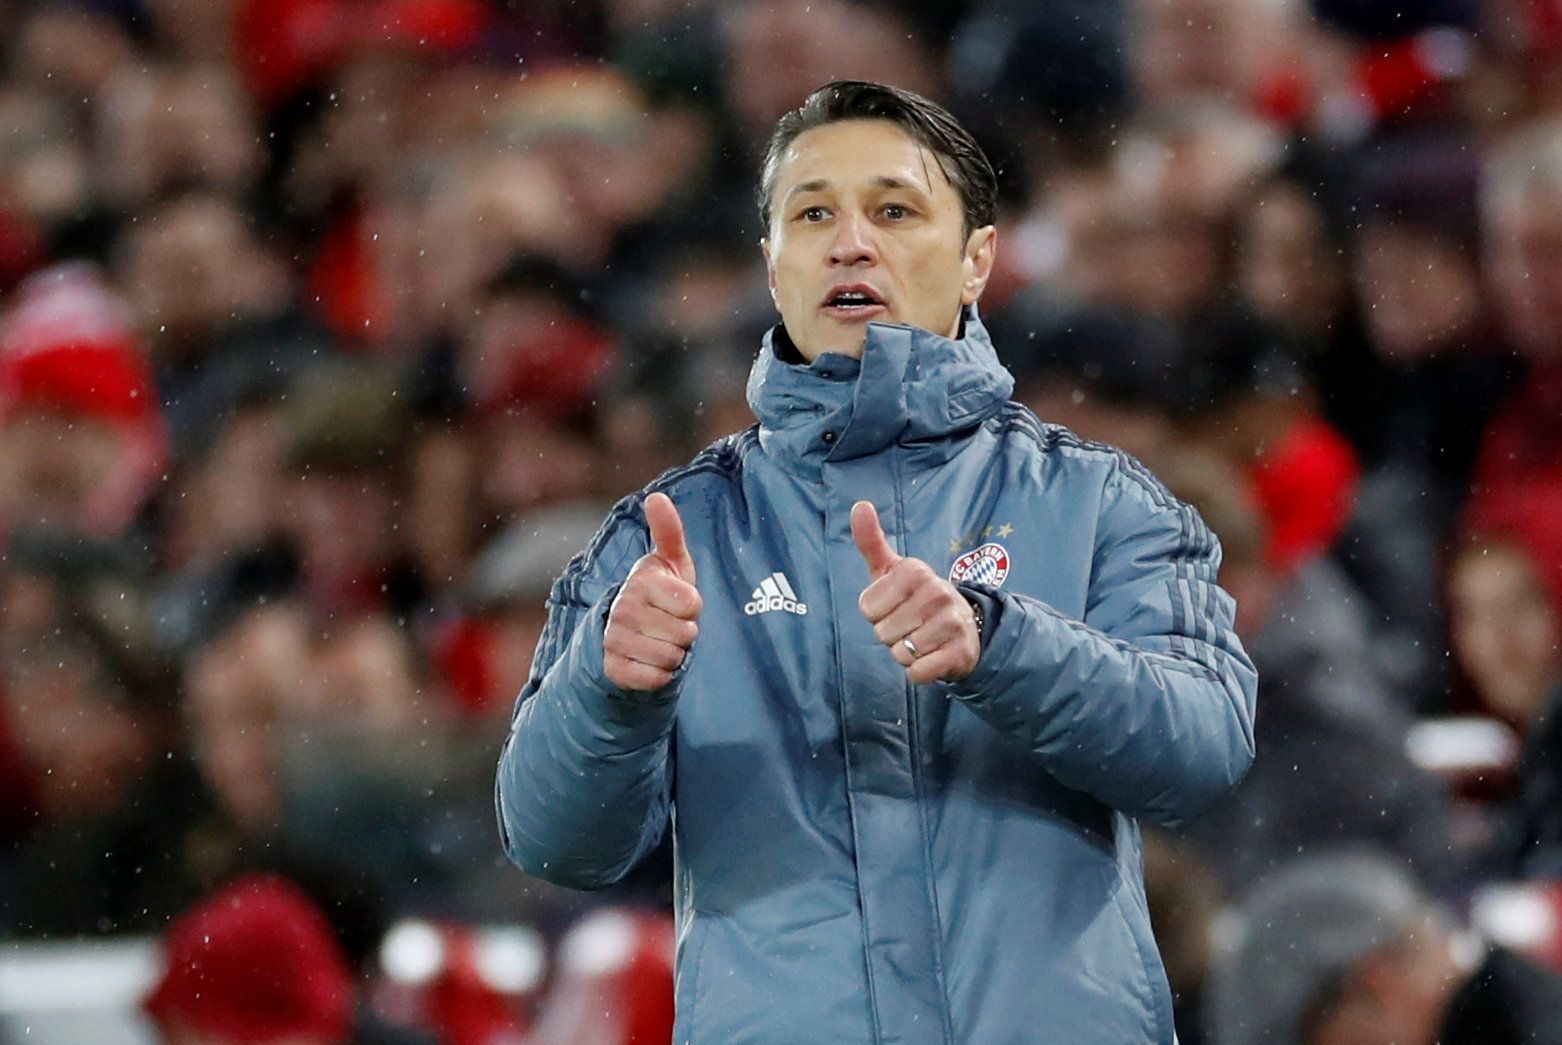 Soccer Football - Champions League - Round of 16 First Leg - Liverpool v Bayern Munich - Anfield, Liverpool, Britain - February 19, 2019  Bayern Munich coach Niko Kovac during the match                 Action Images via Reuters/Carl Recine